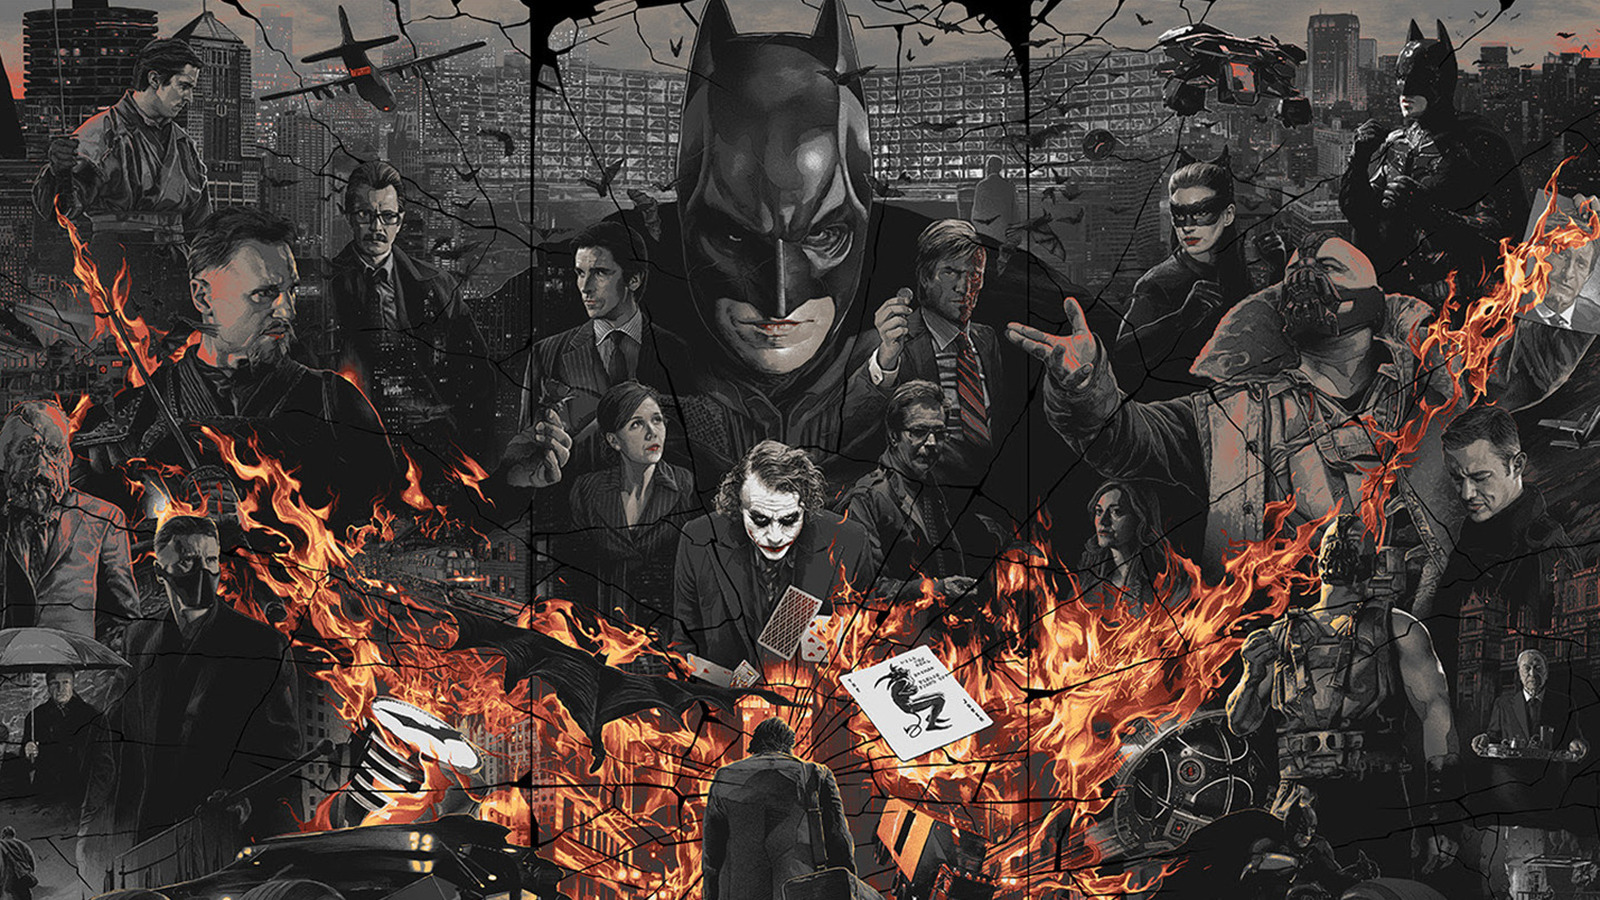 Cool Stuff: The Dark Knight Trilogy Poster By Gabz Is The Hero